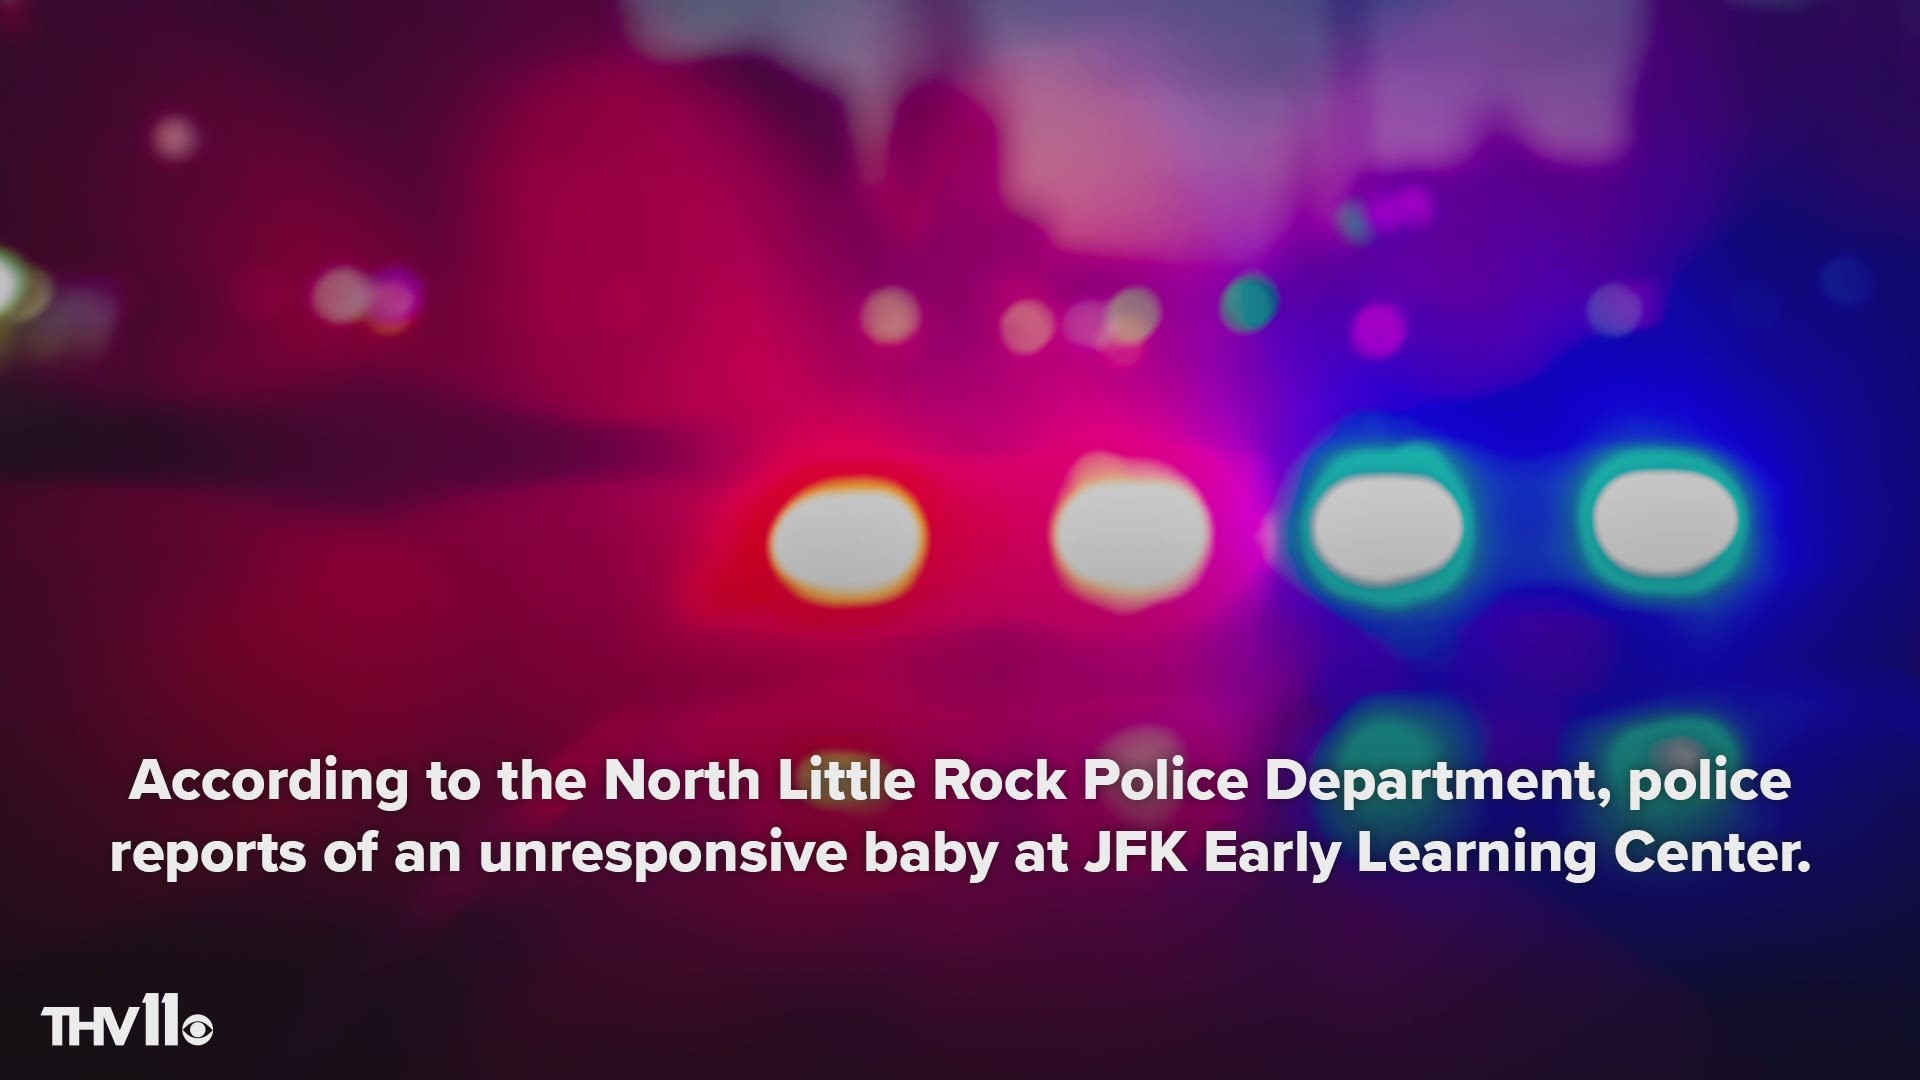 According to the North Little Rock Police Department, police were dispatched to JFK Learning Center after reports of an unresponsive baby.